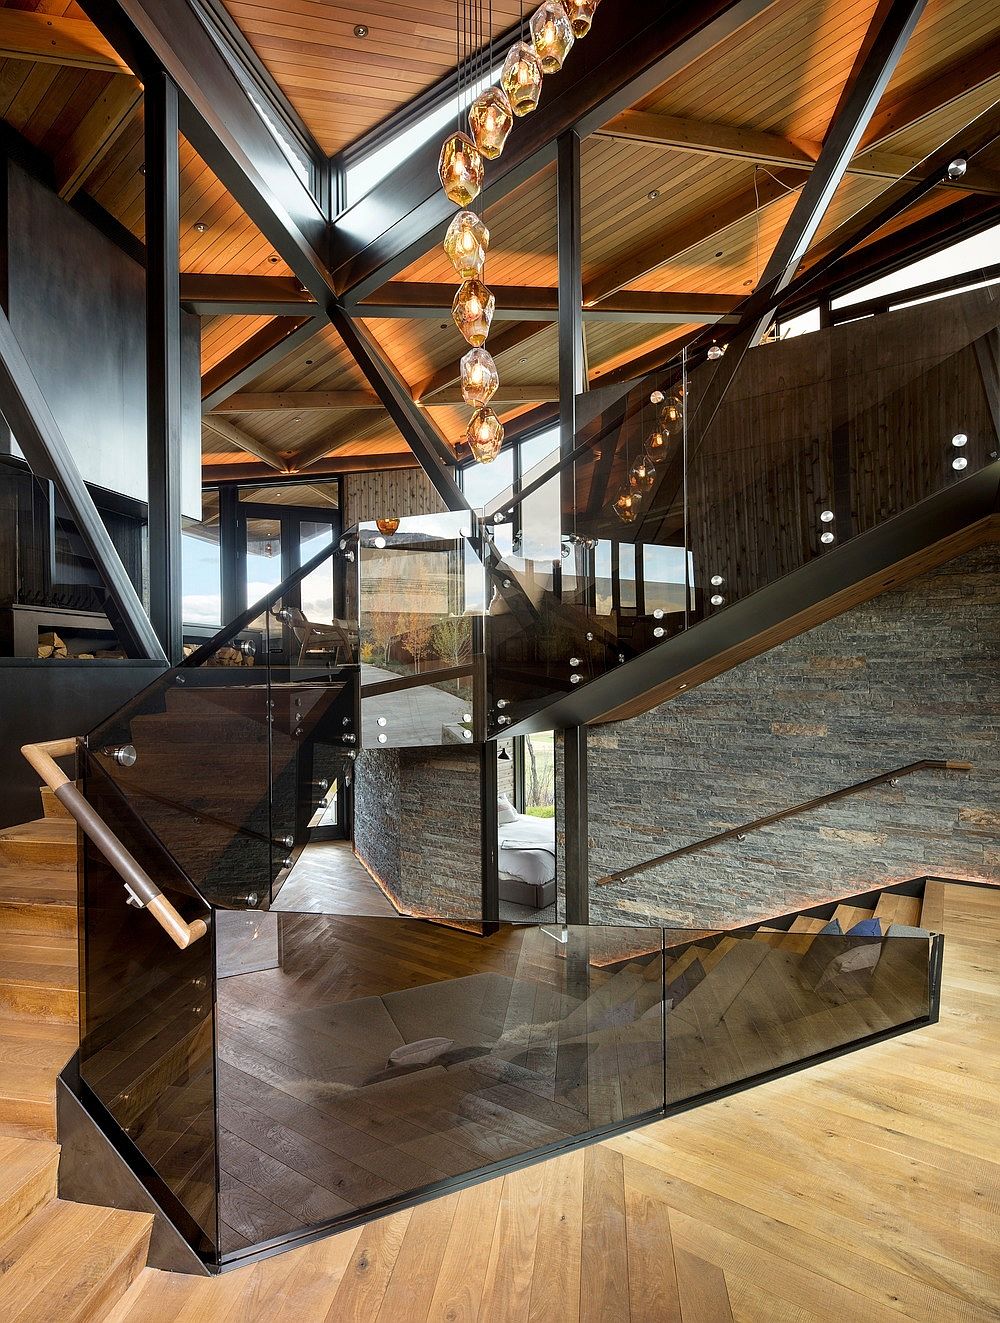 Polished-glass-and-metal-surfaces-along-with-wooden-warmth-inside-the-house